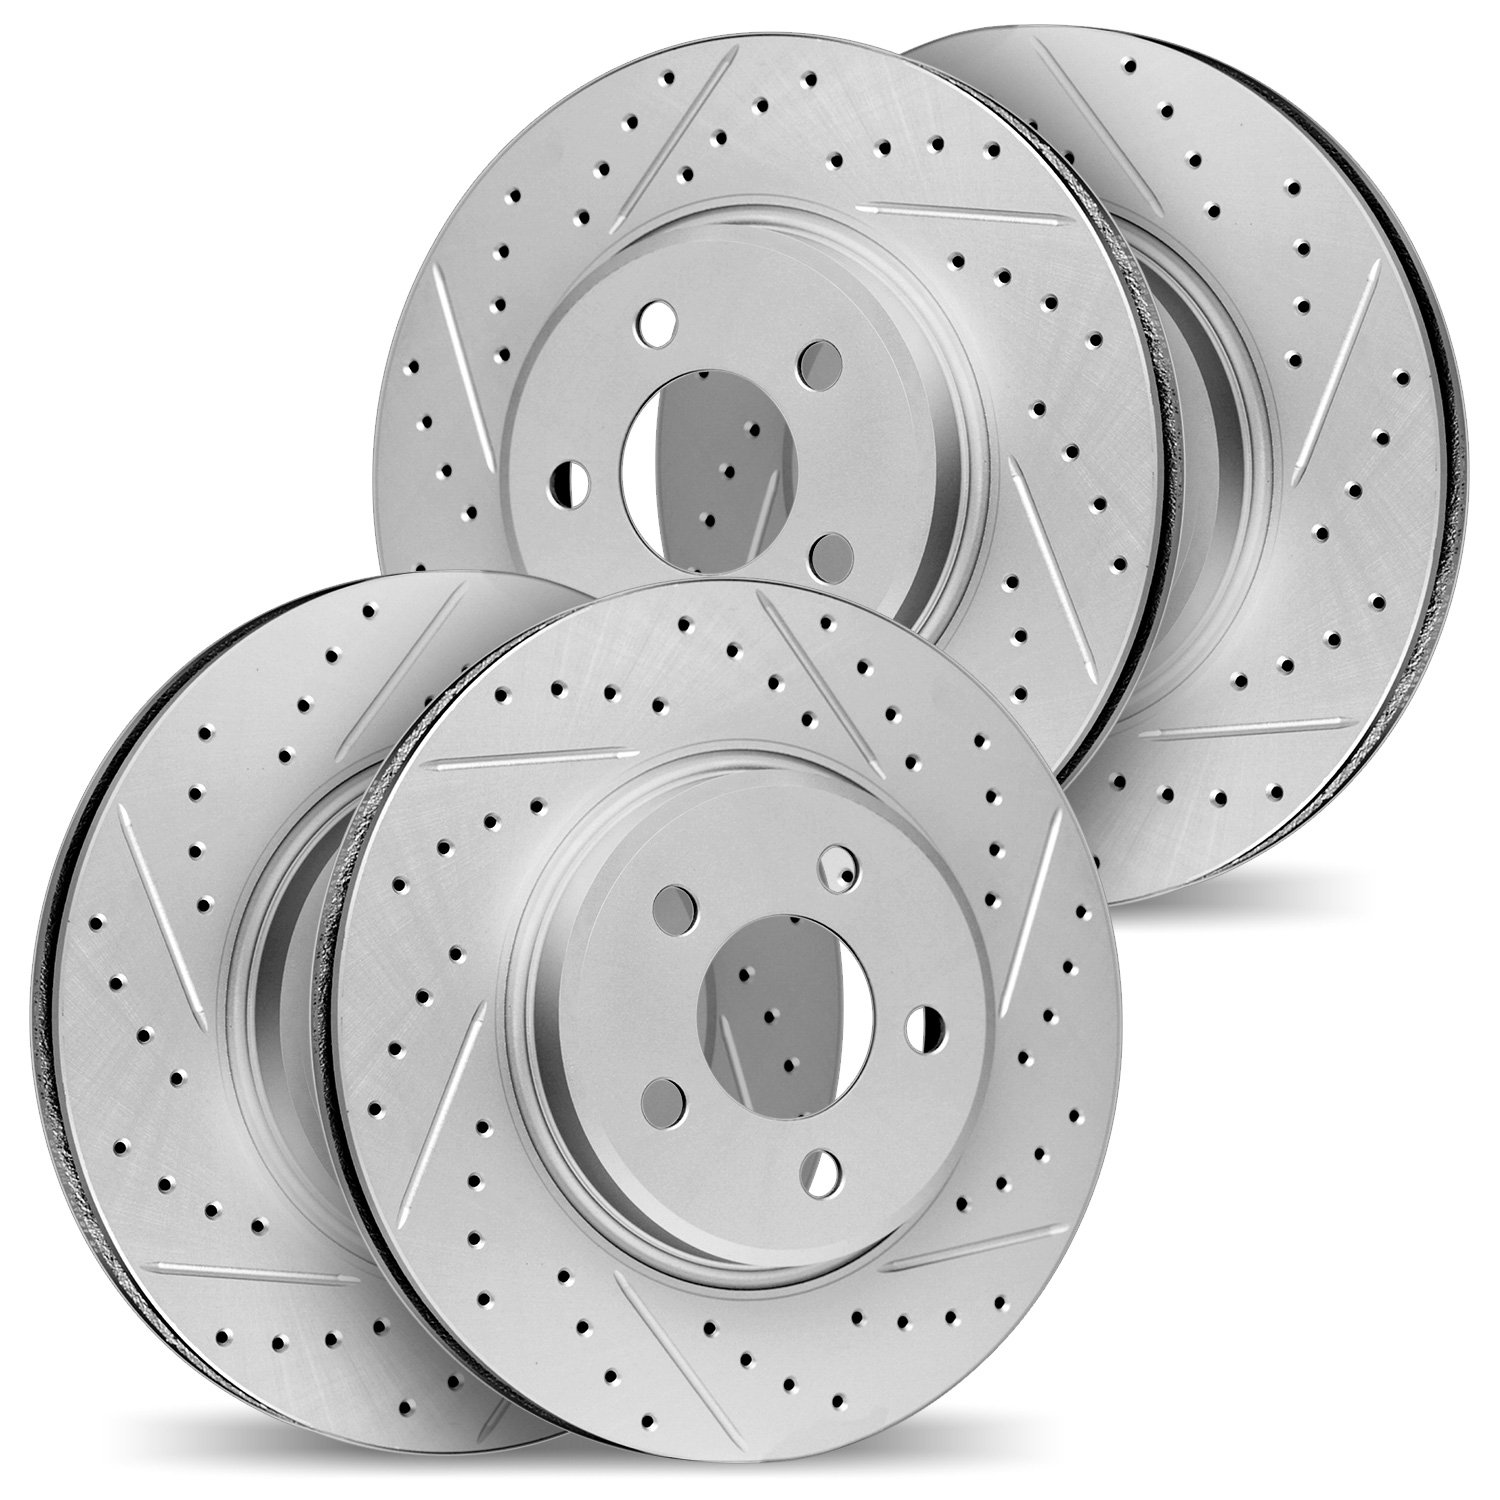 2004-63042 Geoperformance Drilled/Slotted Brake Rotors, 2019-2019 Mercedes-Benz, Position: Front and Rear